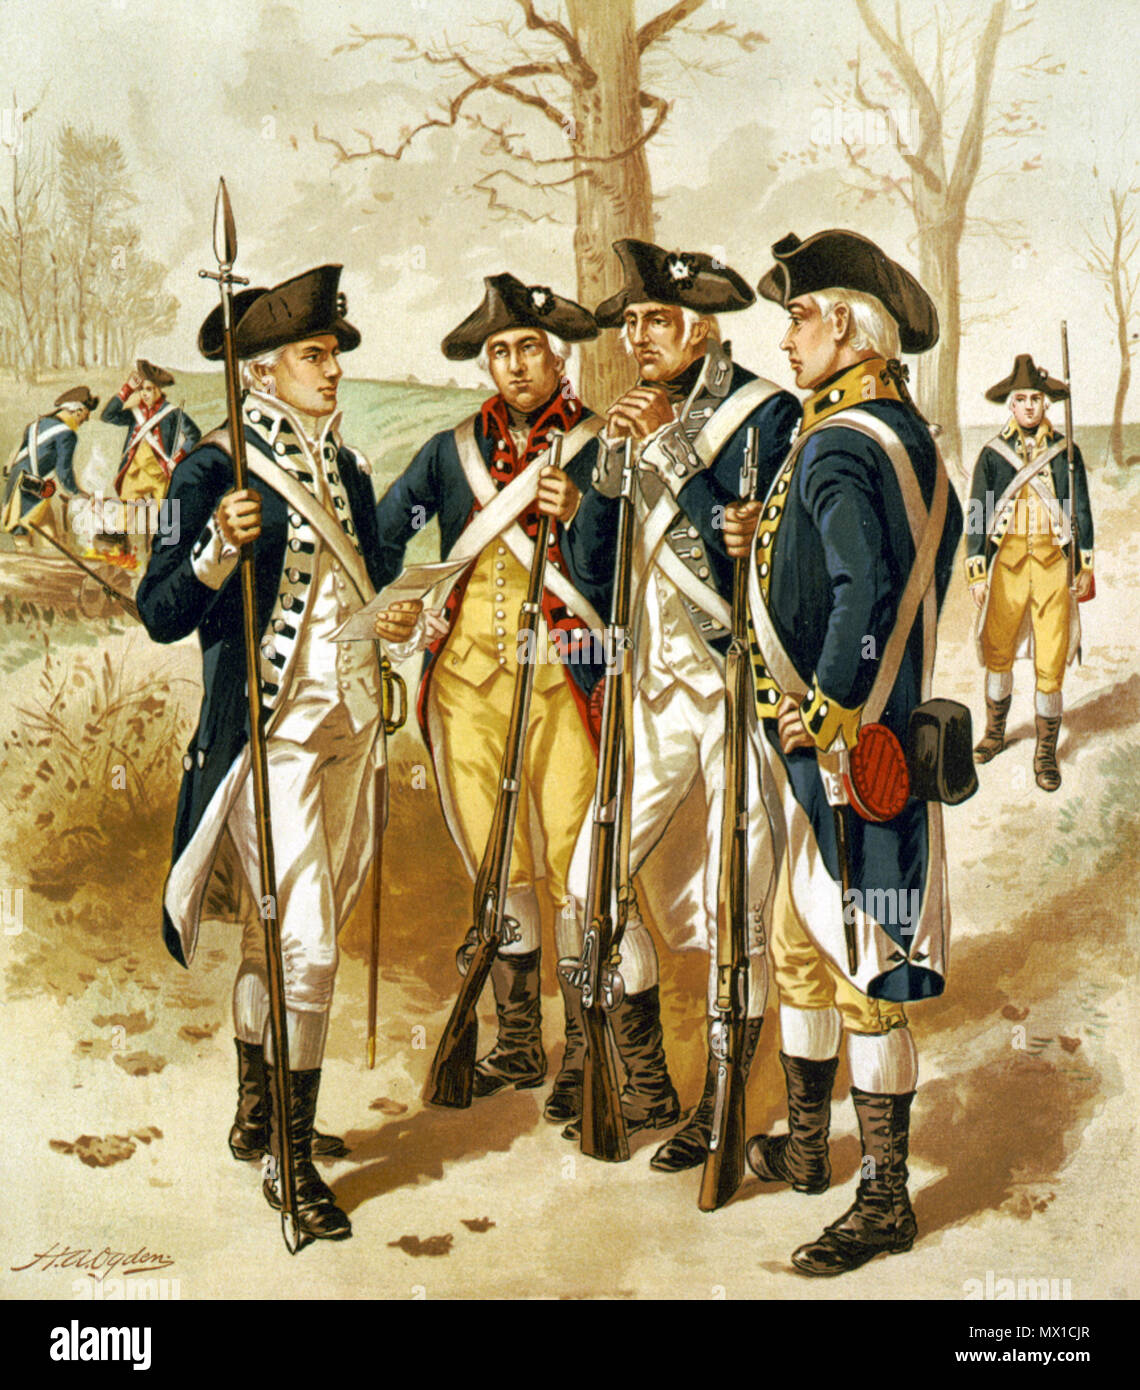 . English: Infantry: Continental Army, 1779-1783, by Henry Alexander Ogden, IV / H. A. Ogden; lith. by G. H. Buek & Co., N.Y. Summary: Illustration depicts uniforms and weapons used during the 1779 to 1783 period of the American Revolution by showing four soldiers standing in an informal group. CALL NUMBER: LOT 4295 [item] [P&P] REPRODUCTION NUMBER: LC-USZC4-2135 (color film copy transparency) LC-USZ62-12383 (b&w film copy neg.) MEDIUM: 1 print : lithograph, color. FORMAT:Lithographs Color 1890-1900. REPOSITORY: Library of Congress Prints and Photographs Division Washington, D.C. 20540 USA DIG Stock Photo